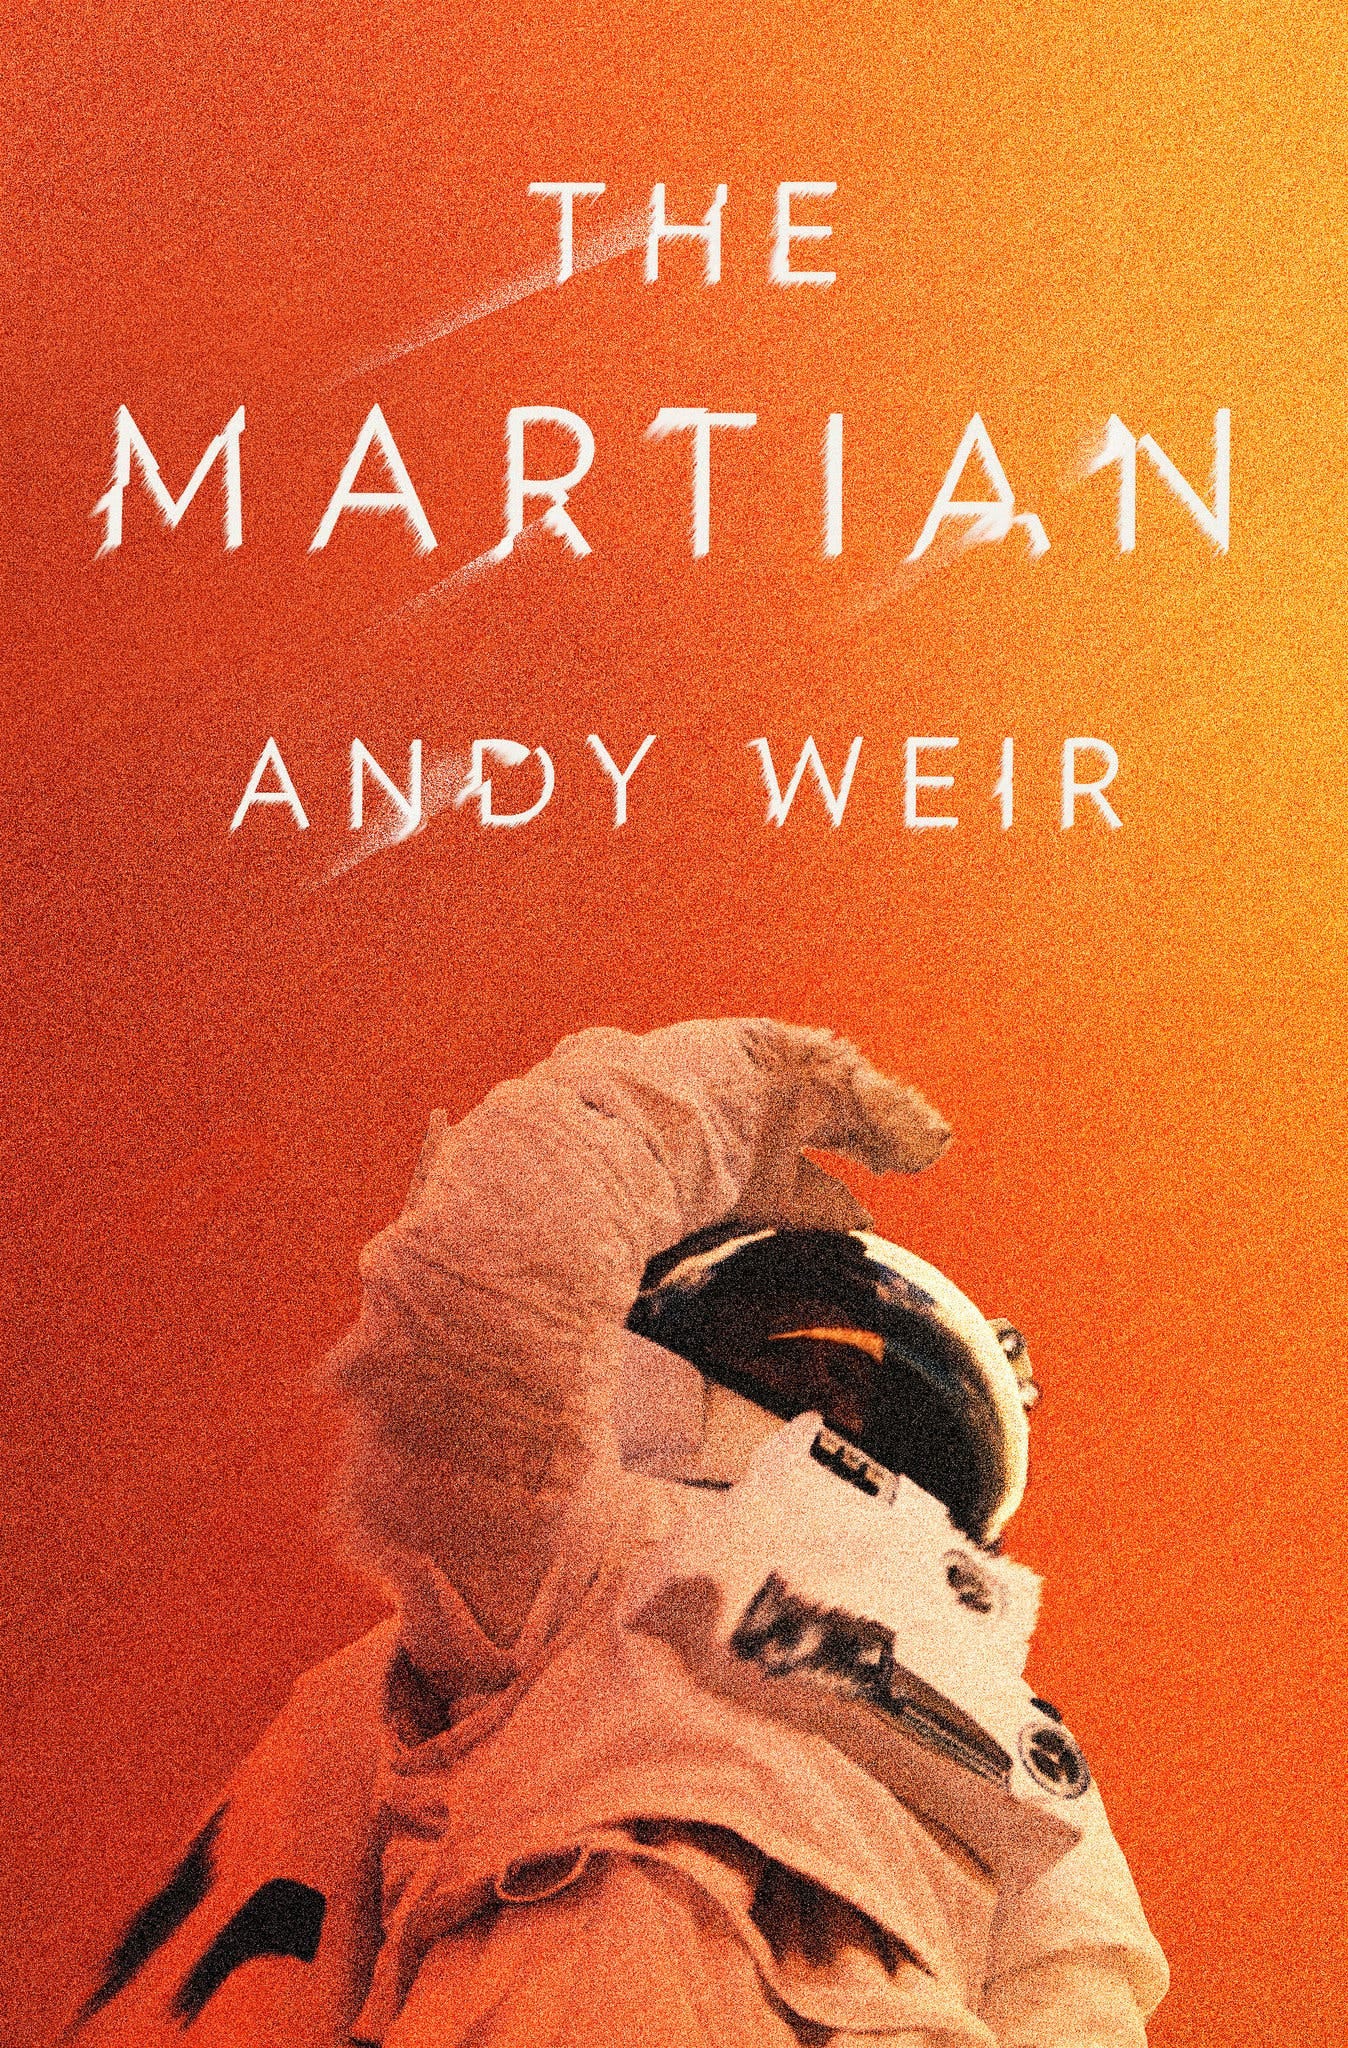 Review - The Martian